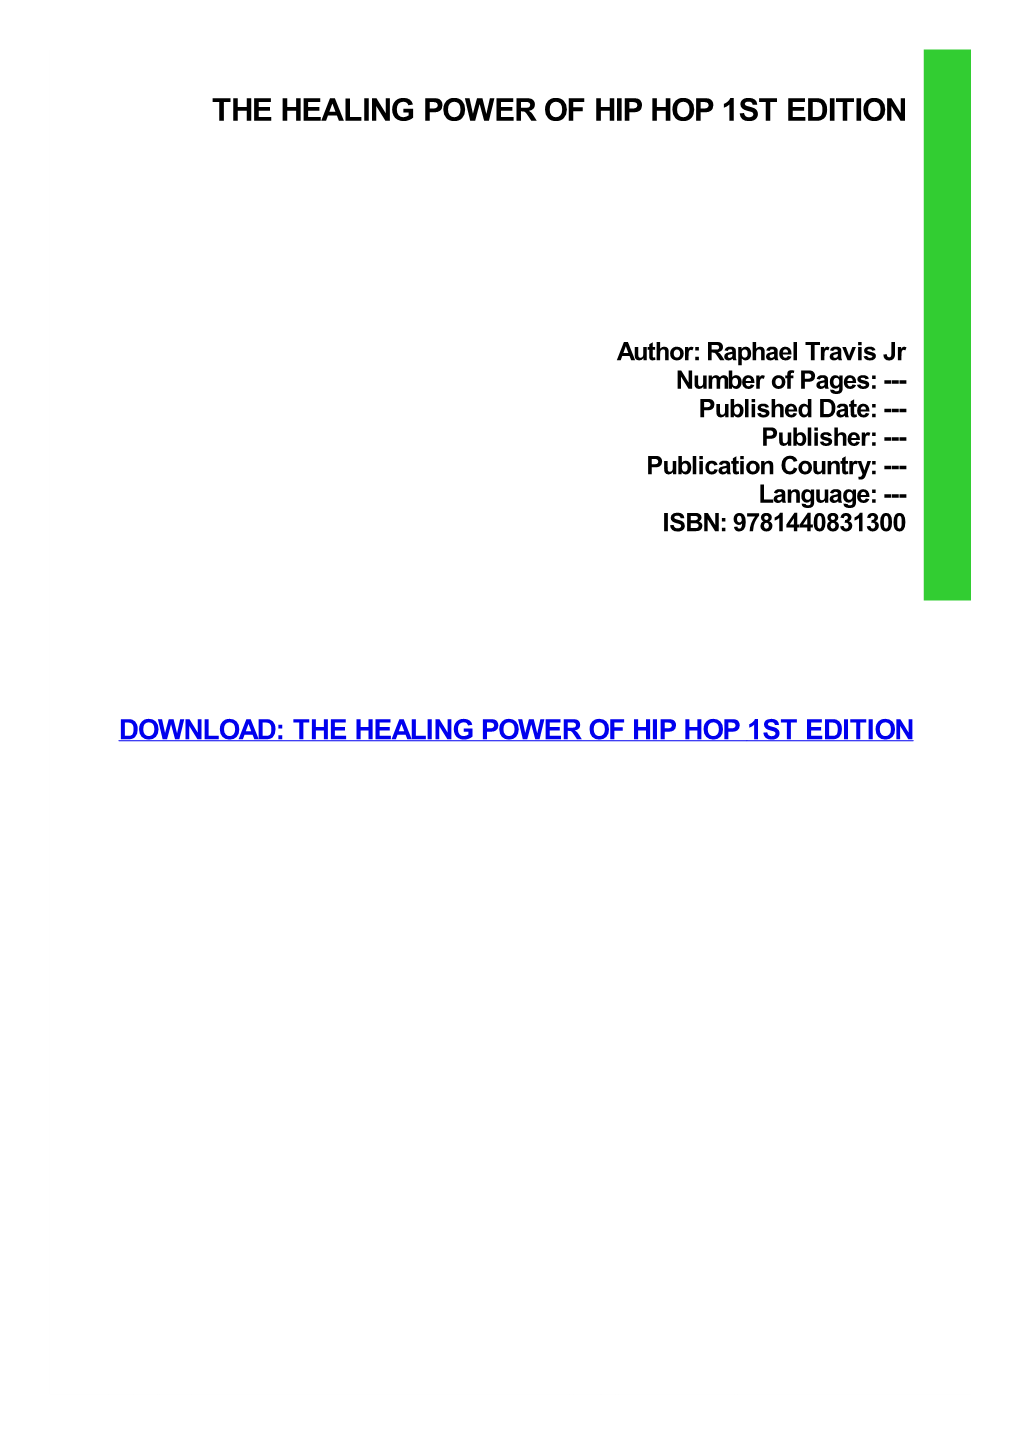 The Healing Power of Hip Hop 1St Edition Download Free